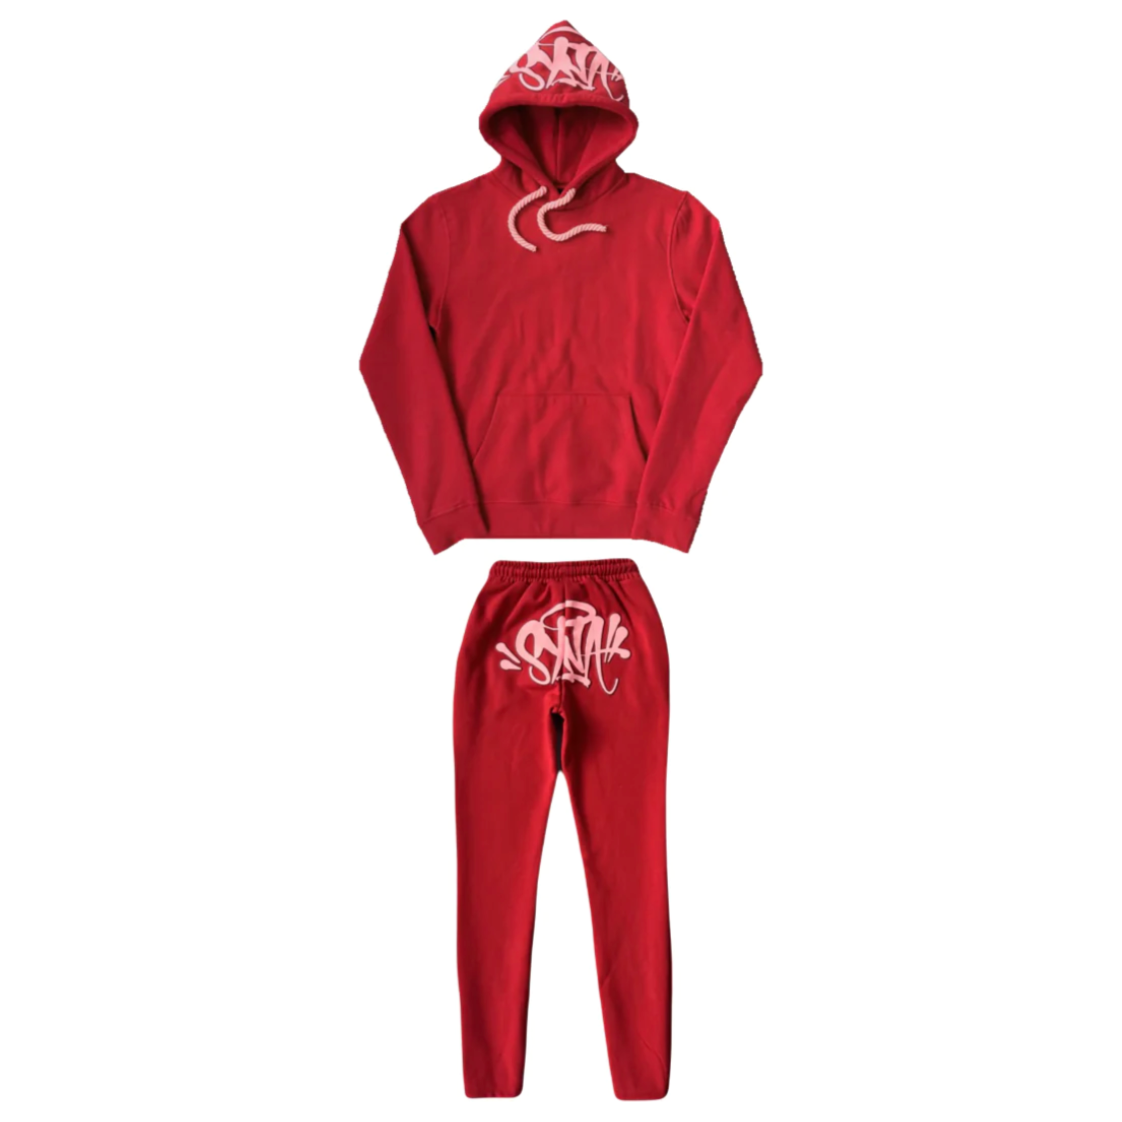 Syna World Logo Tracksuit Red by SYNA from £250.00